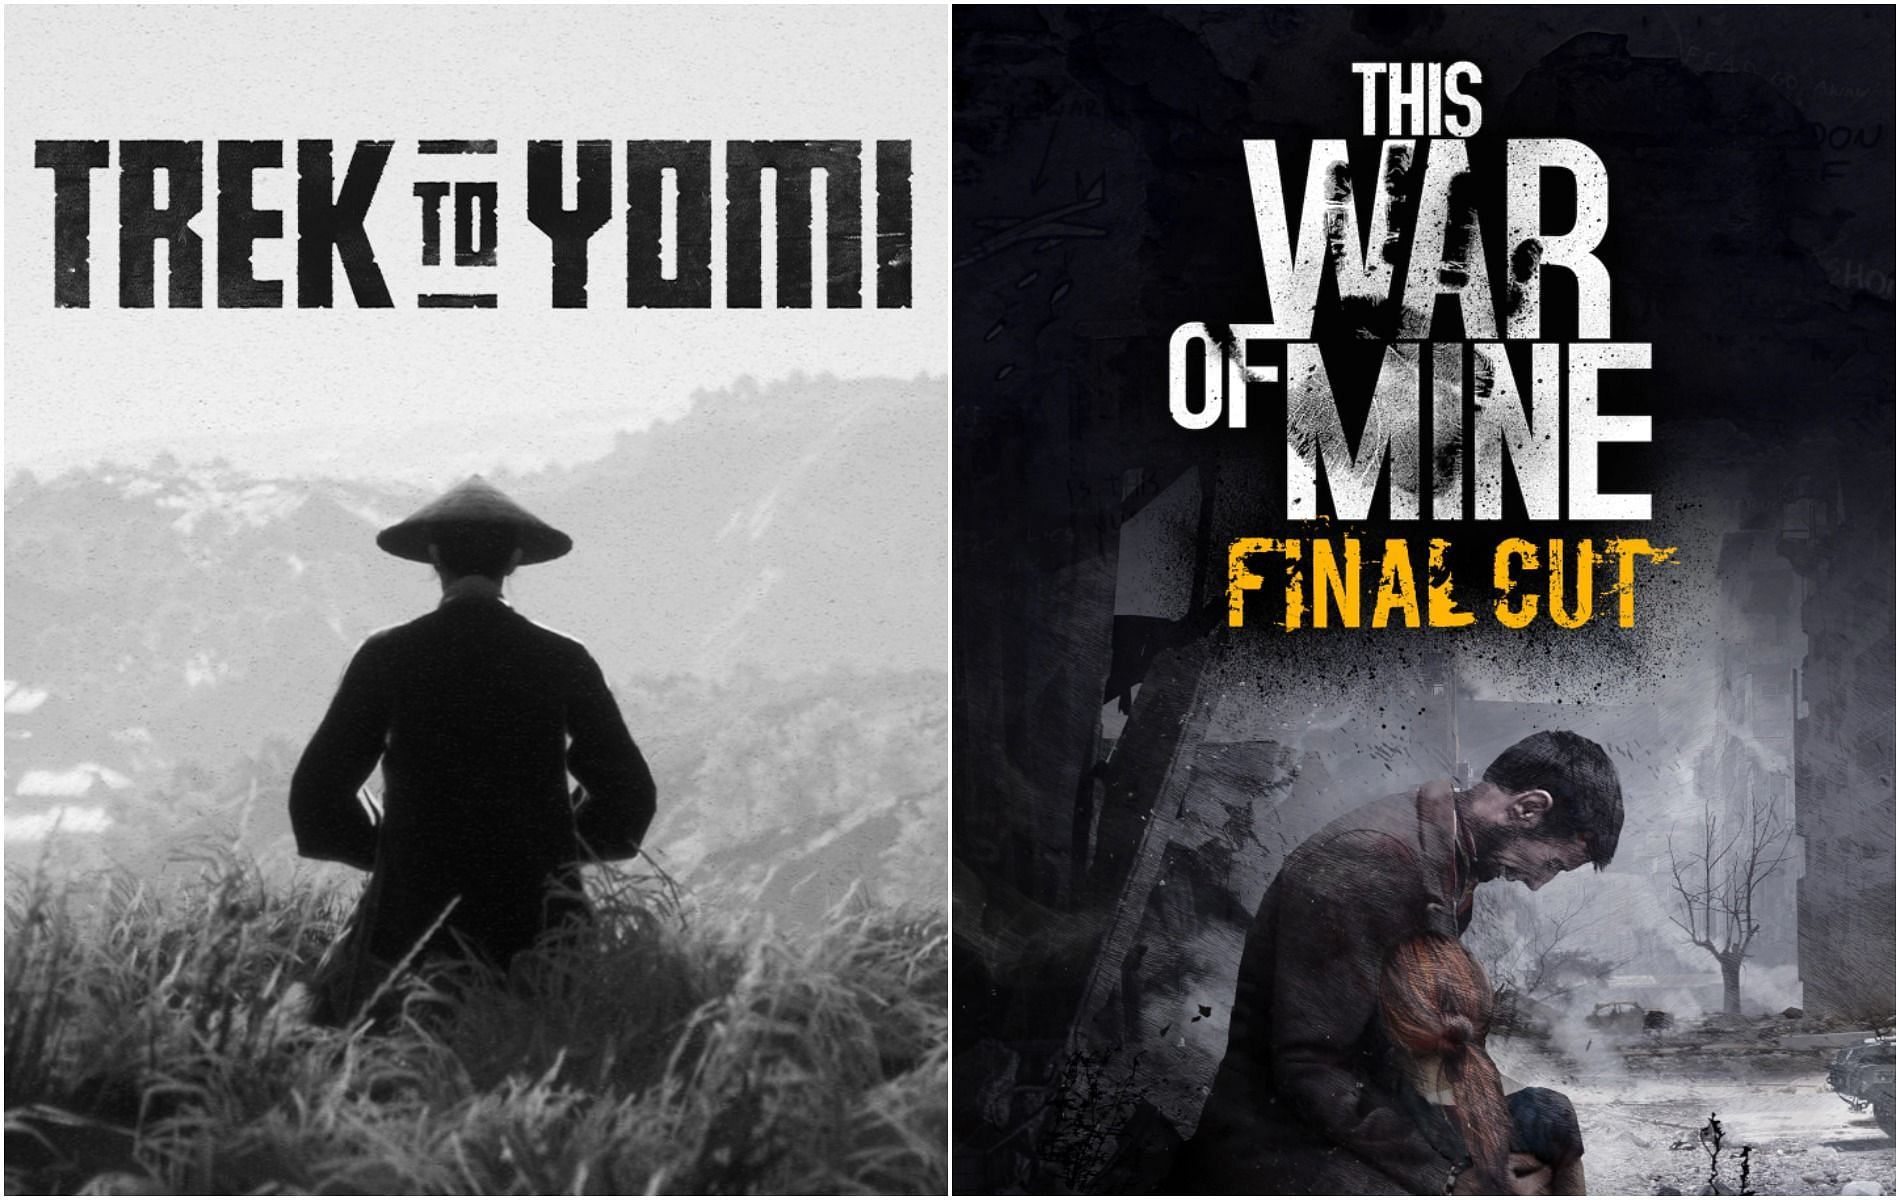 Trek to Yomi and This War of Mine: Final Cut are coming to Game Pass (Image by Devolver Digital and 11 Bit Studios)